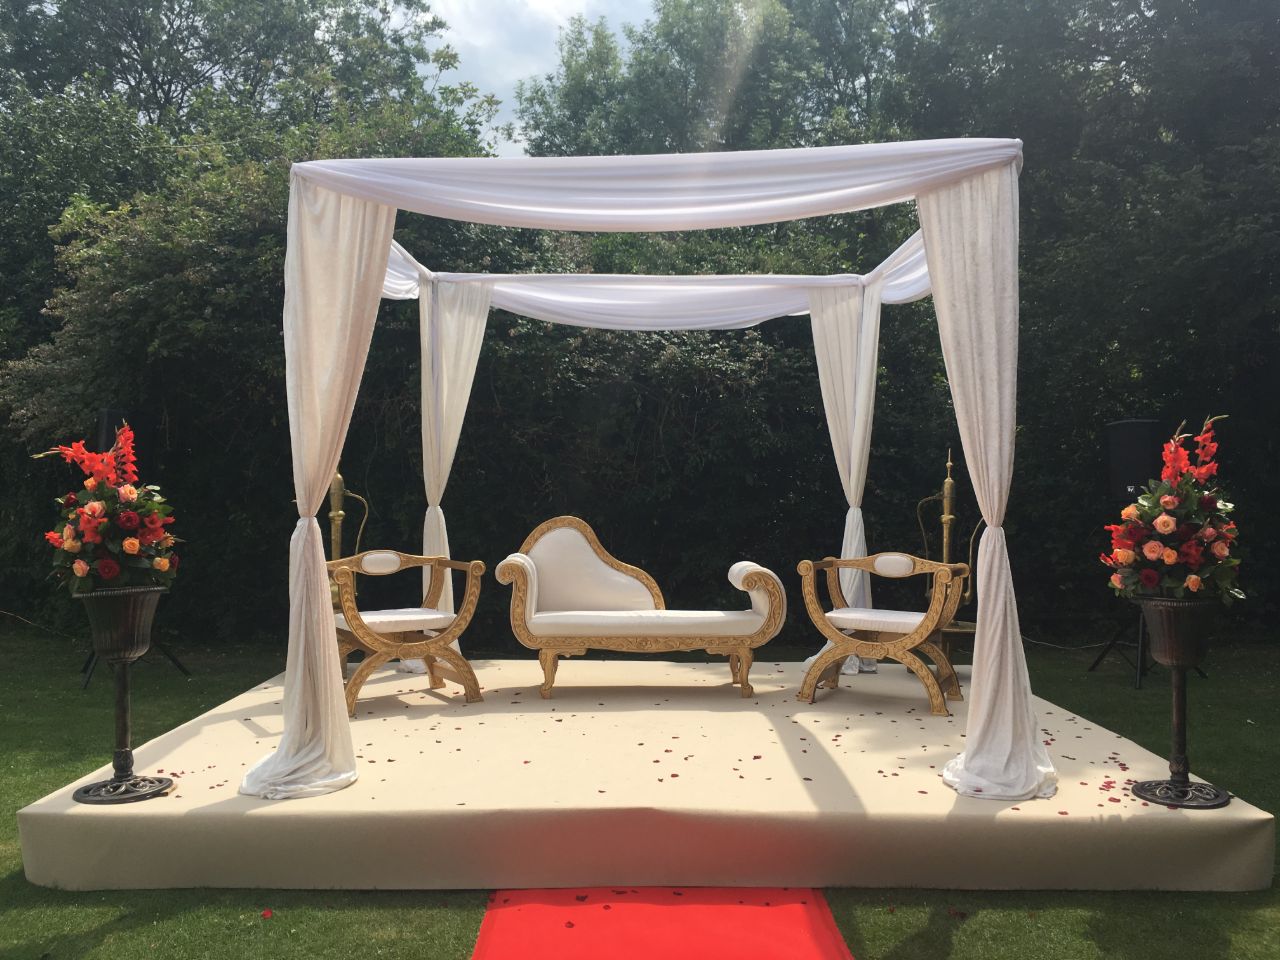 Seating area at end of red carpet wedding venue essex